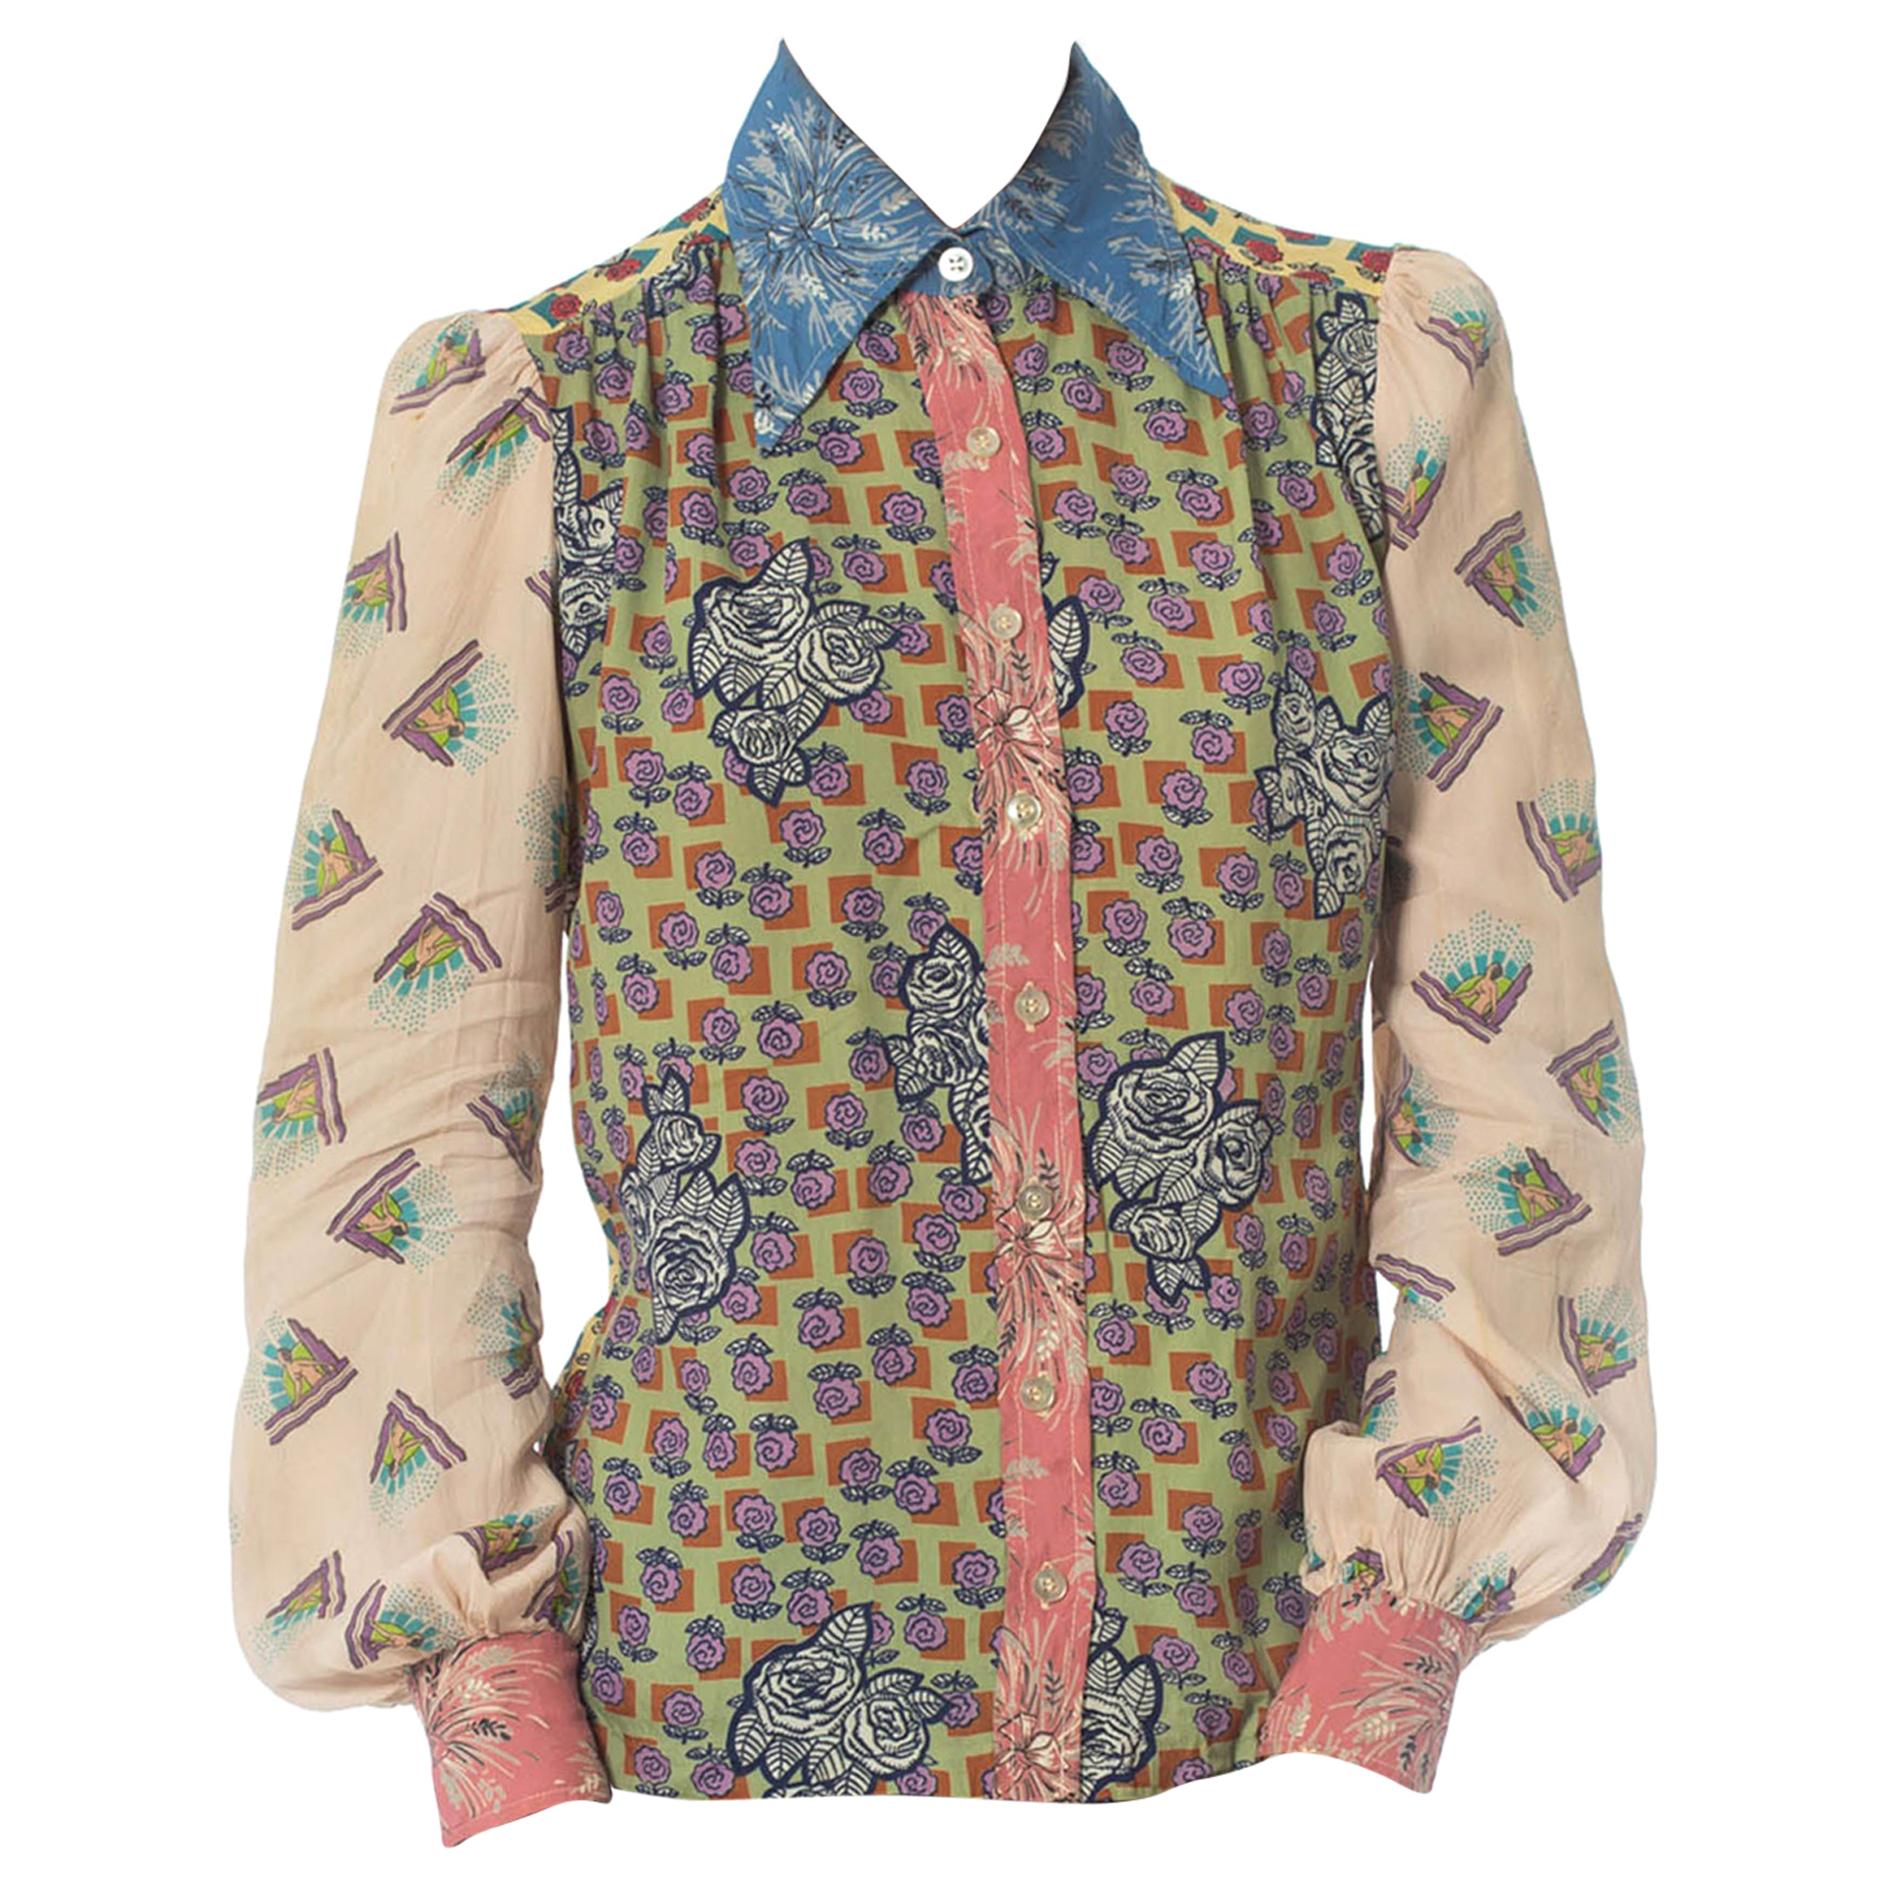 1970S Rayon Patchwork Print Shirt Made From 1940S Vintage Prints